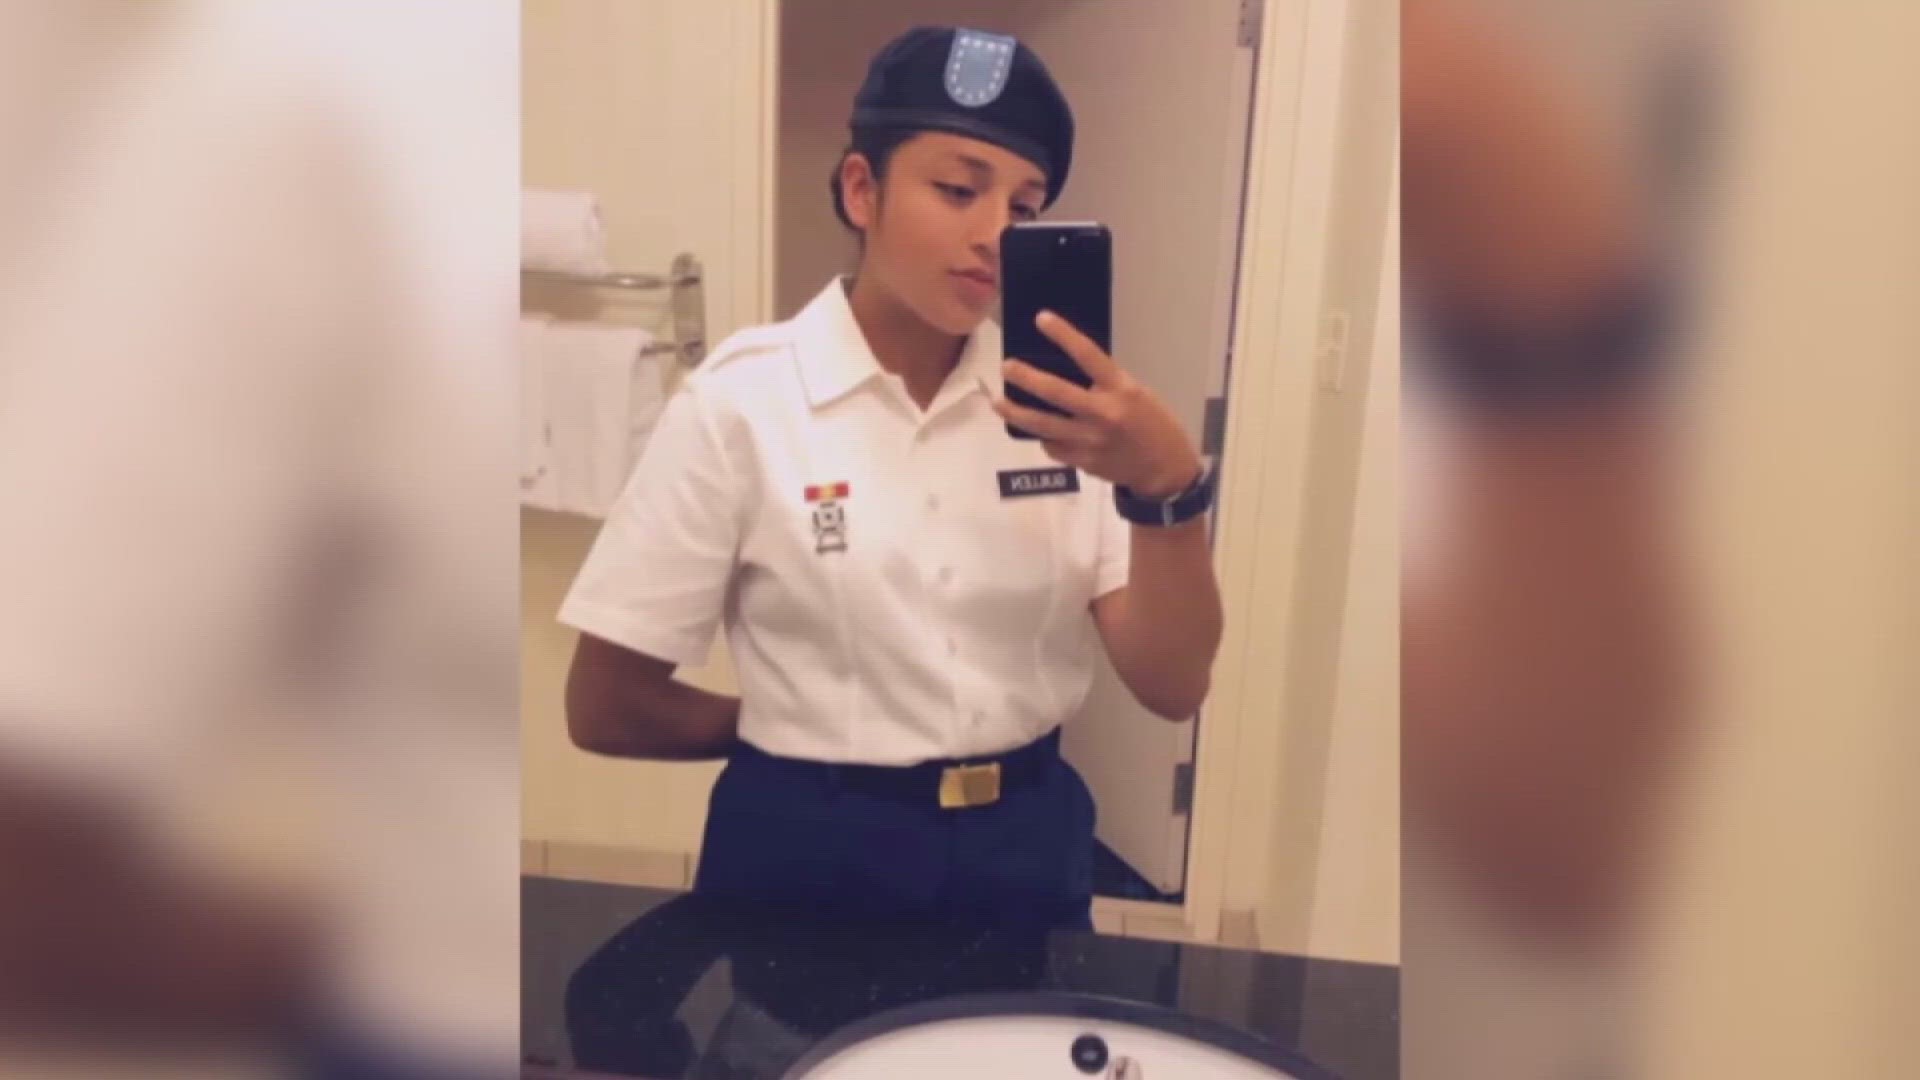 Mayra Guillen is planning to hold a March for Justice event in Washington D.C. to fight for protections for soldiers.